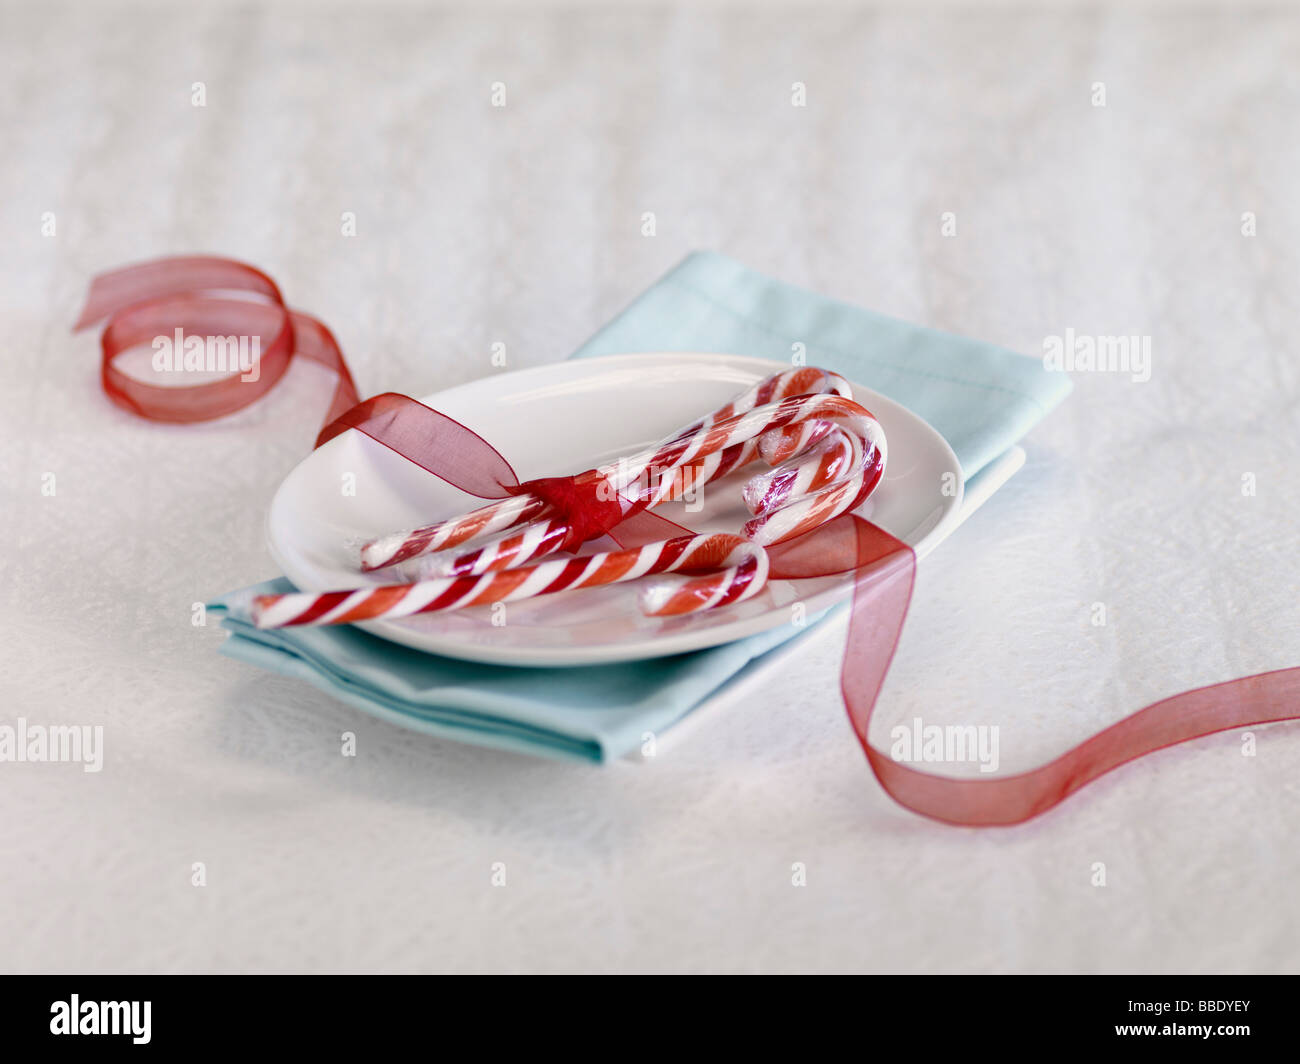 Candy Canes Tied with Red Ribbon on Plate Stock Photo